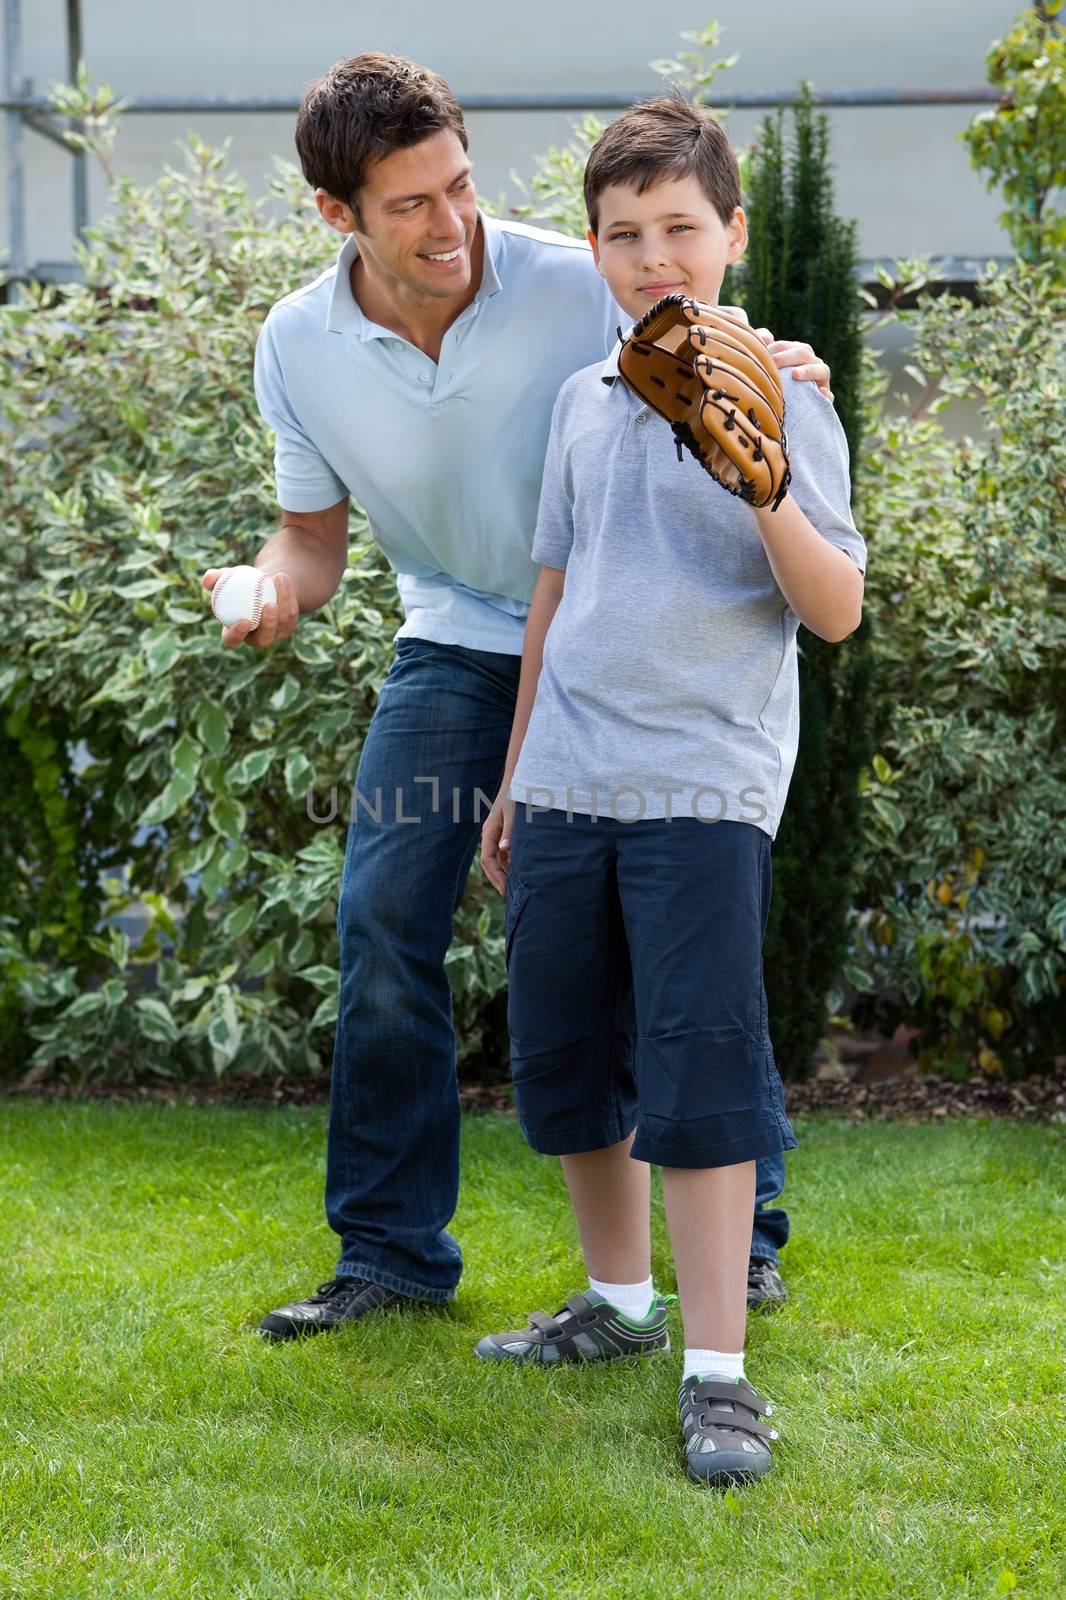 Loving little boy playing baseball with his father in their backyard